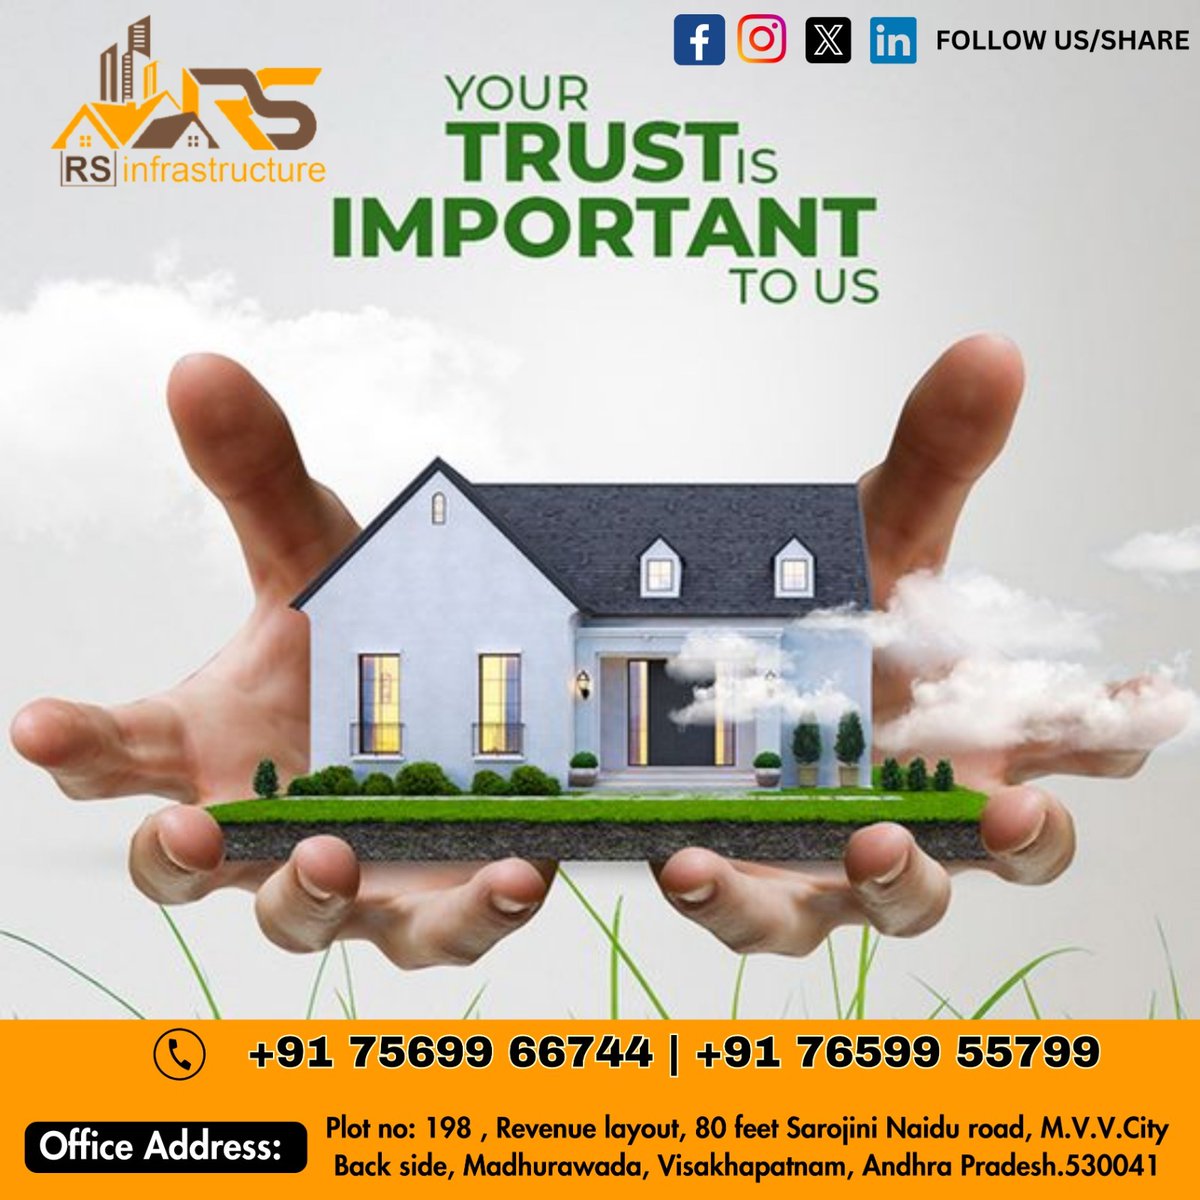 Building dreams, fostering trust! At RS Infrastructure, your trust is our cornerstone. 🏡 Let us construct the foundation for your dreams. Your vision, our commitment.

Contact Us: +91 75699 66744 +91 76599 55799

#RSInfrastructure #DreamHome #TrustInConstruction #BuildingDreams